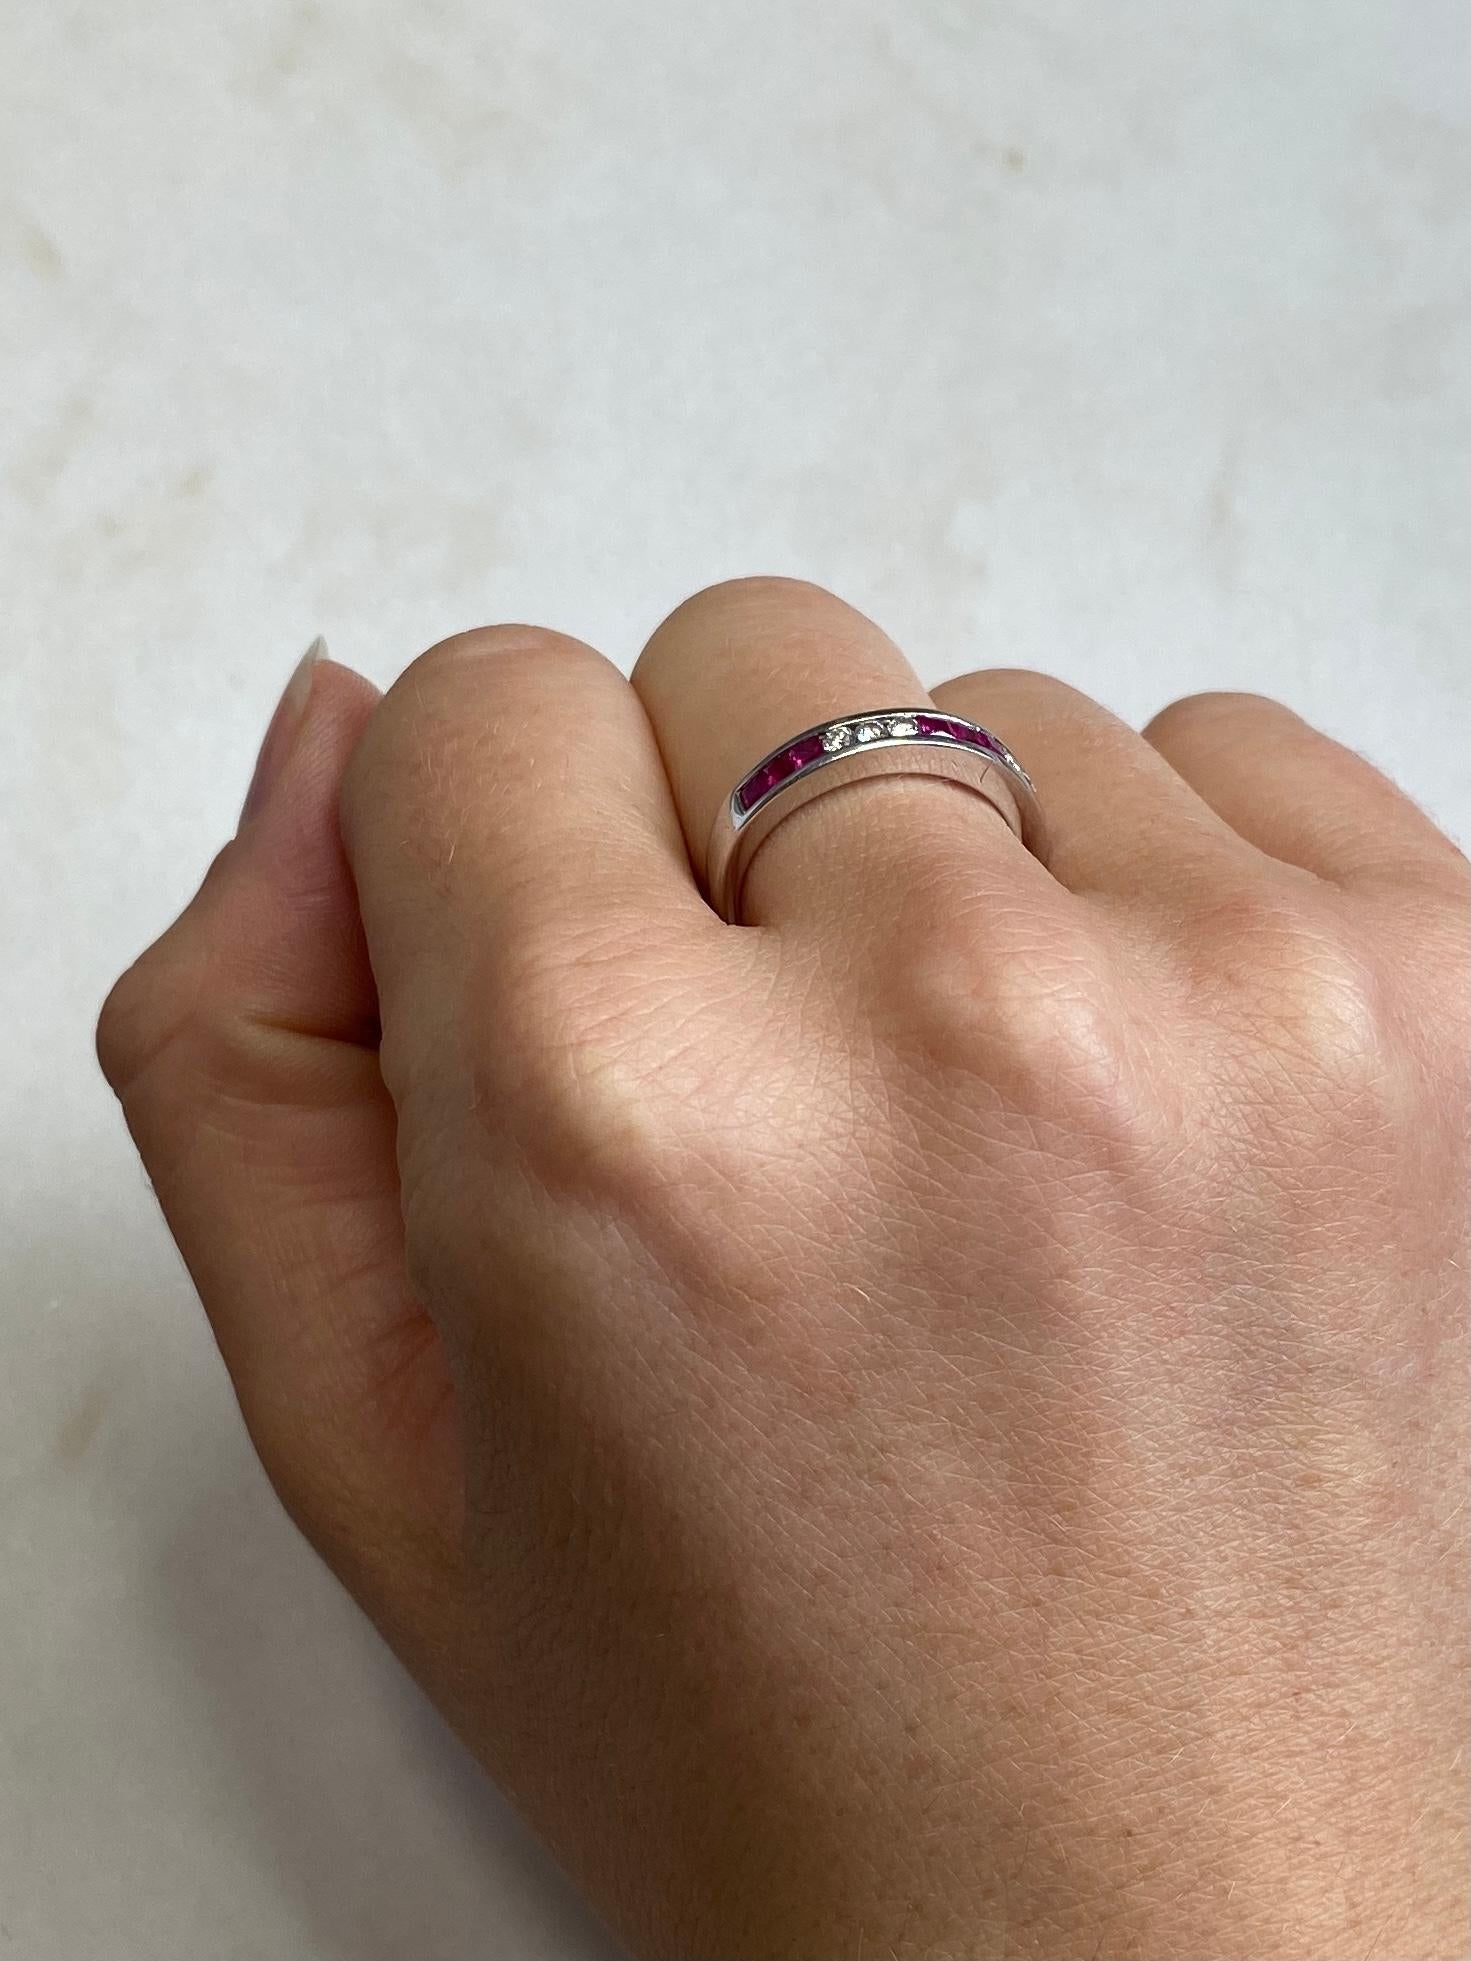 The stones are gorgeous in this band. The rubies are square cut and measure 5pts each and in-between these trios of pink stones are bright round cut diamonds measuring 4pts each. 

Ring Size: M 1/2 or 6 1/2 
Band Width: 3.5mm

Weight: 3.8g

